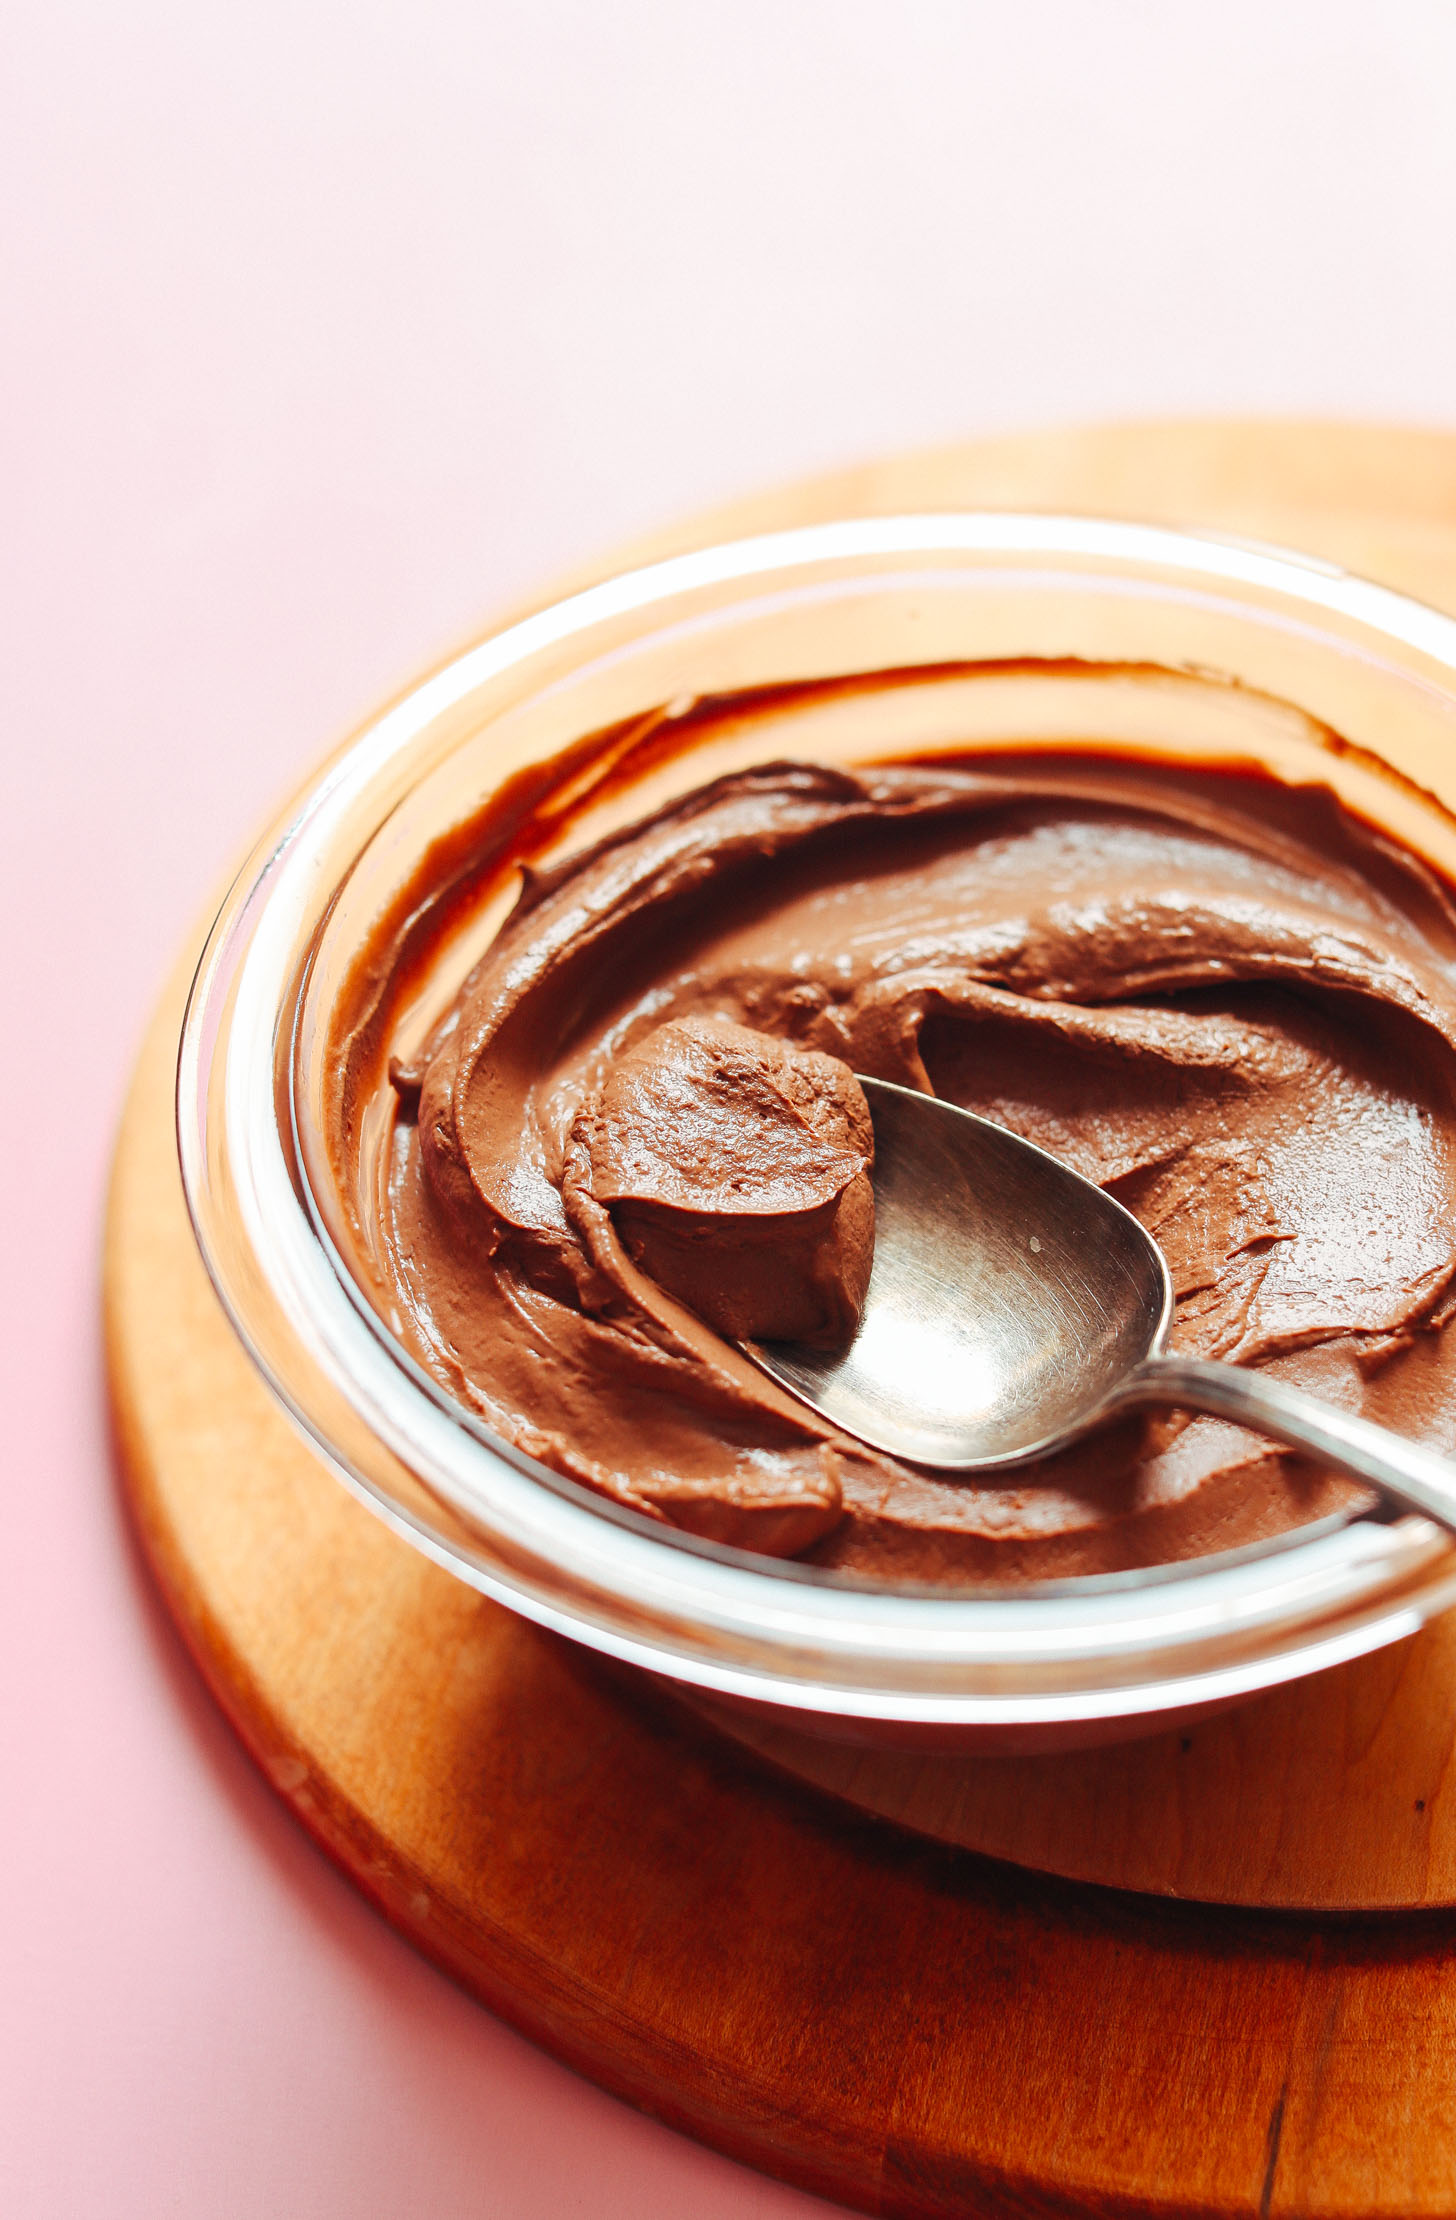 Grabbing a spoonful of rich and creamy Vegan Chocolate Mousse